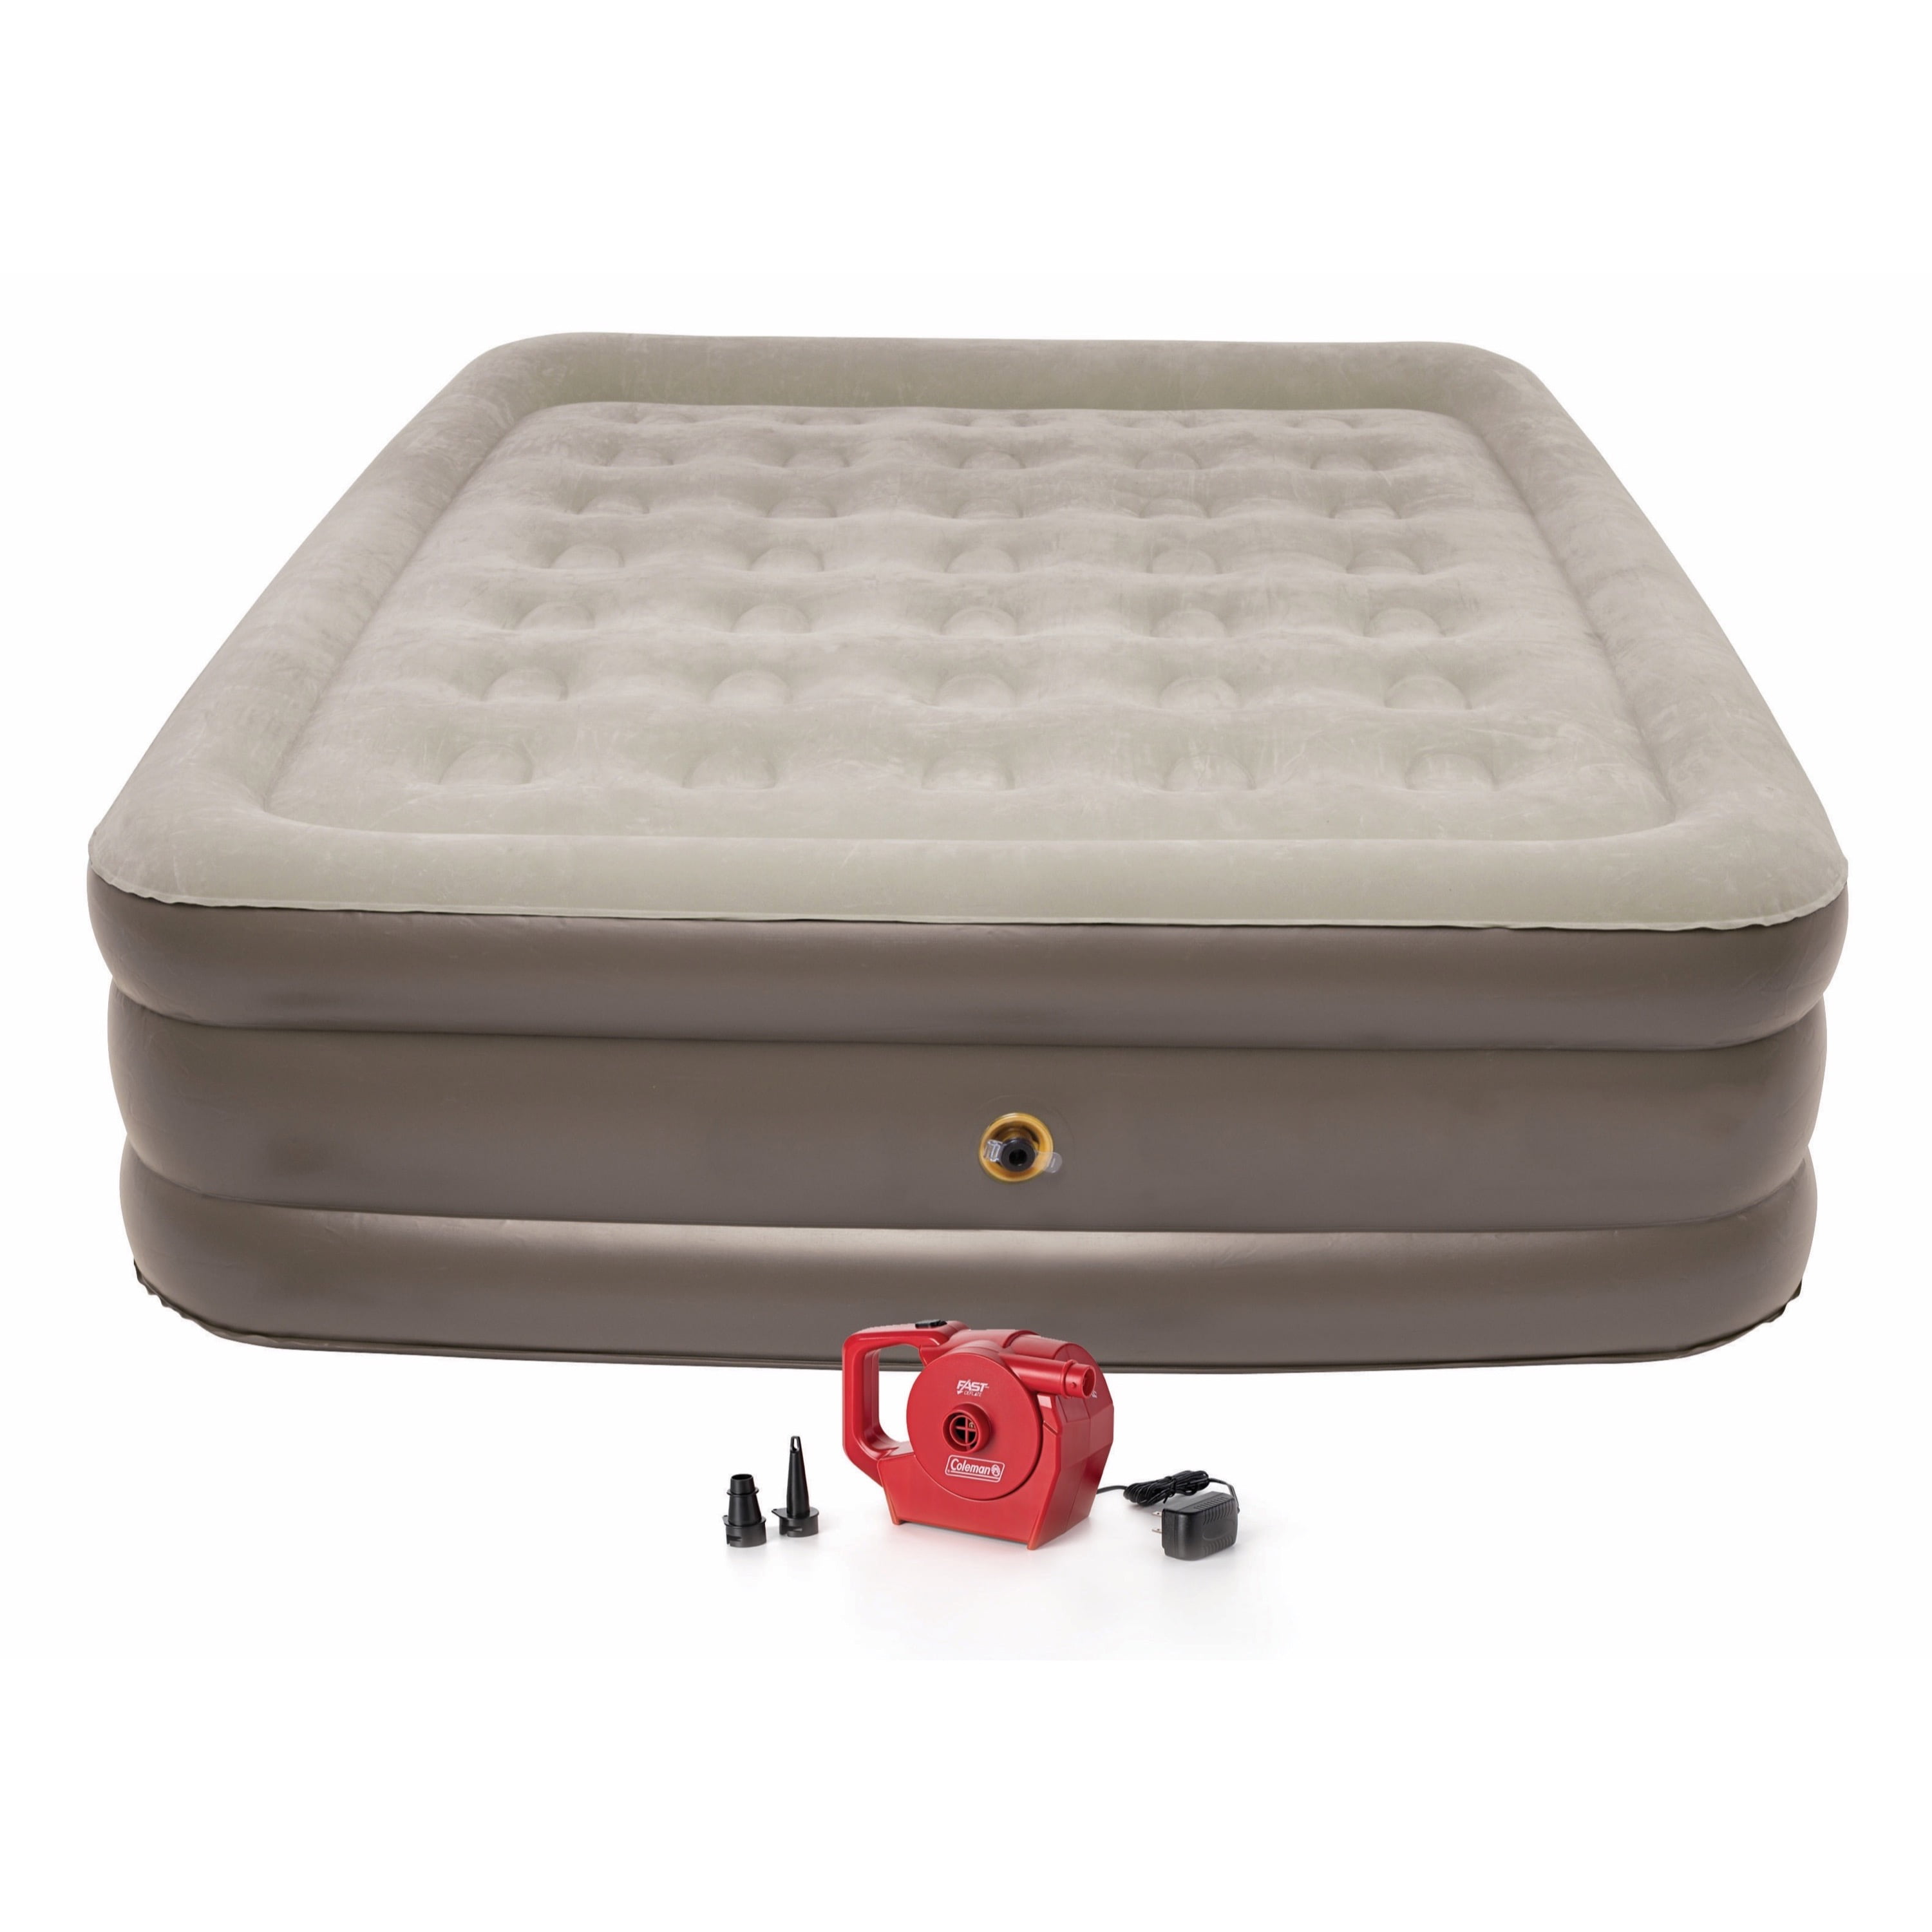 2000015764 Coleman Airbed Queen Extra High 4d BIP C002 for sale online 